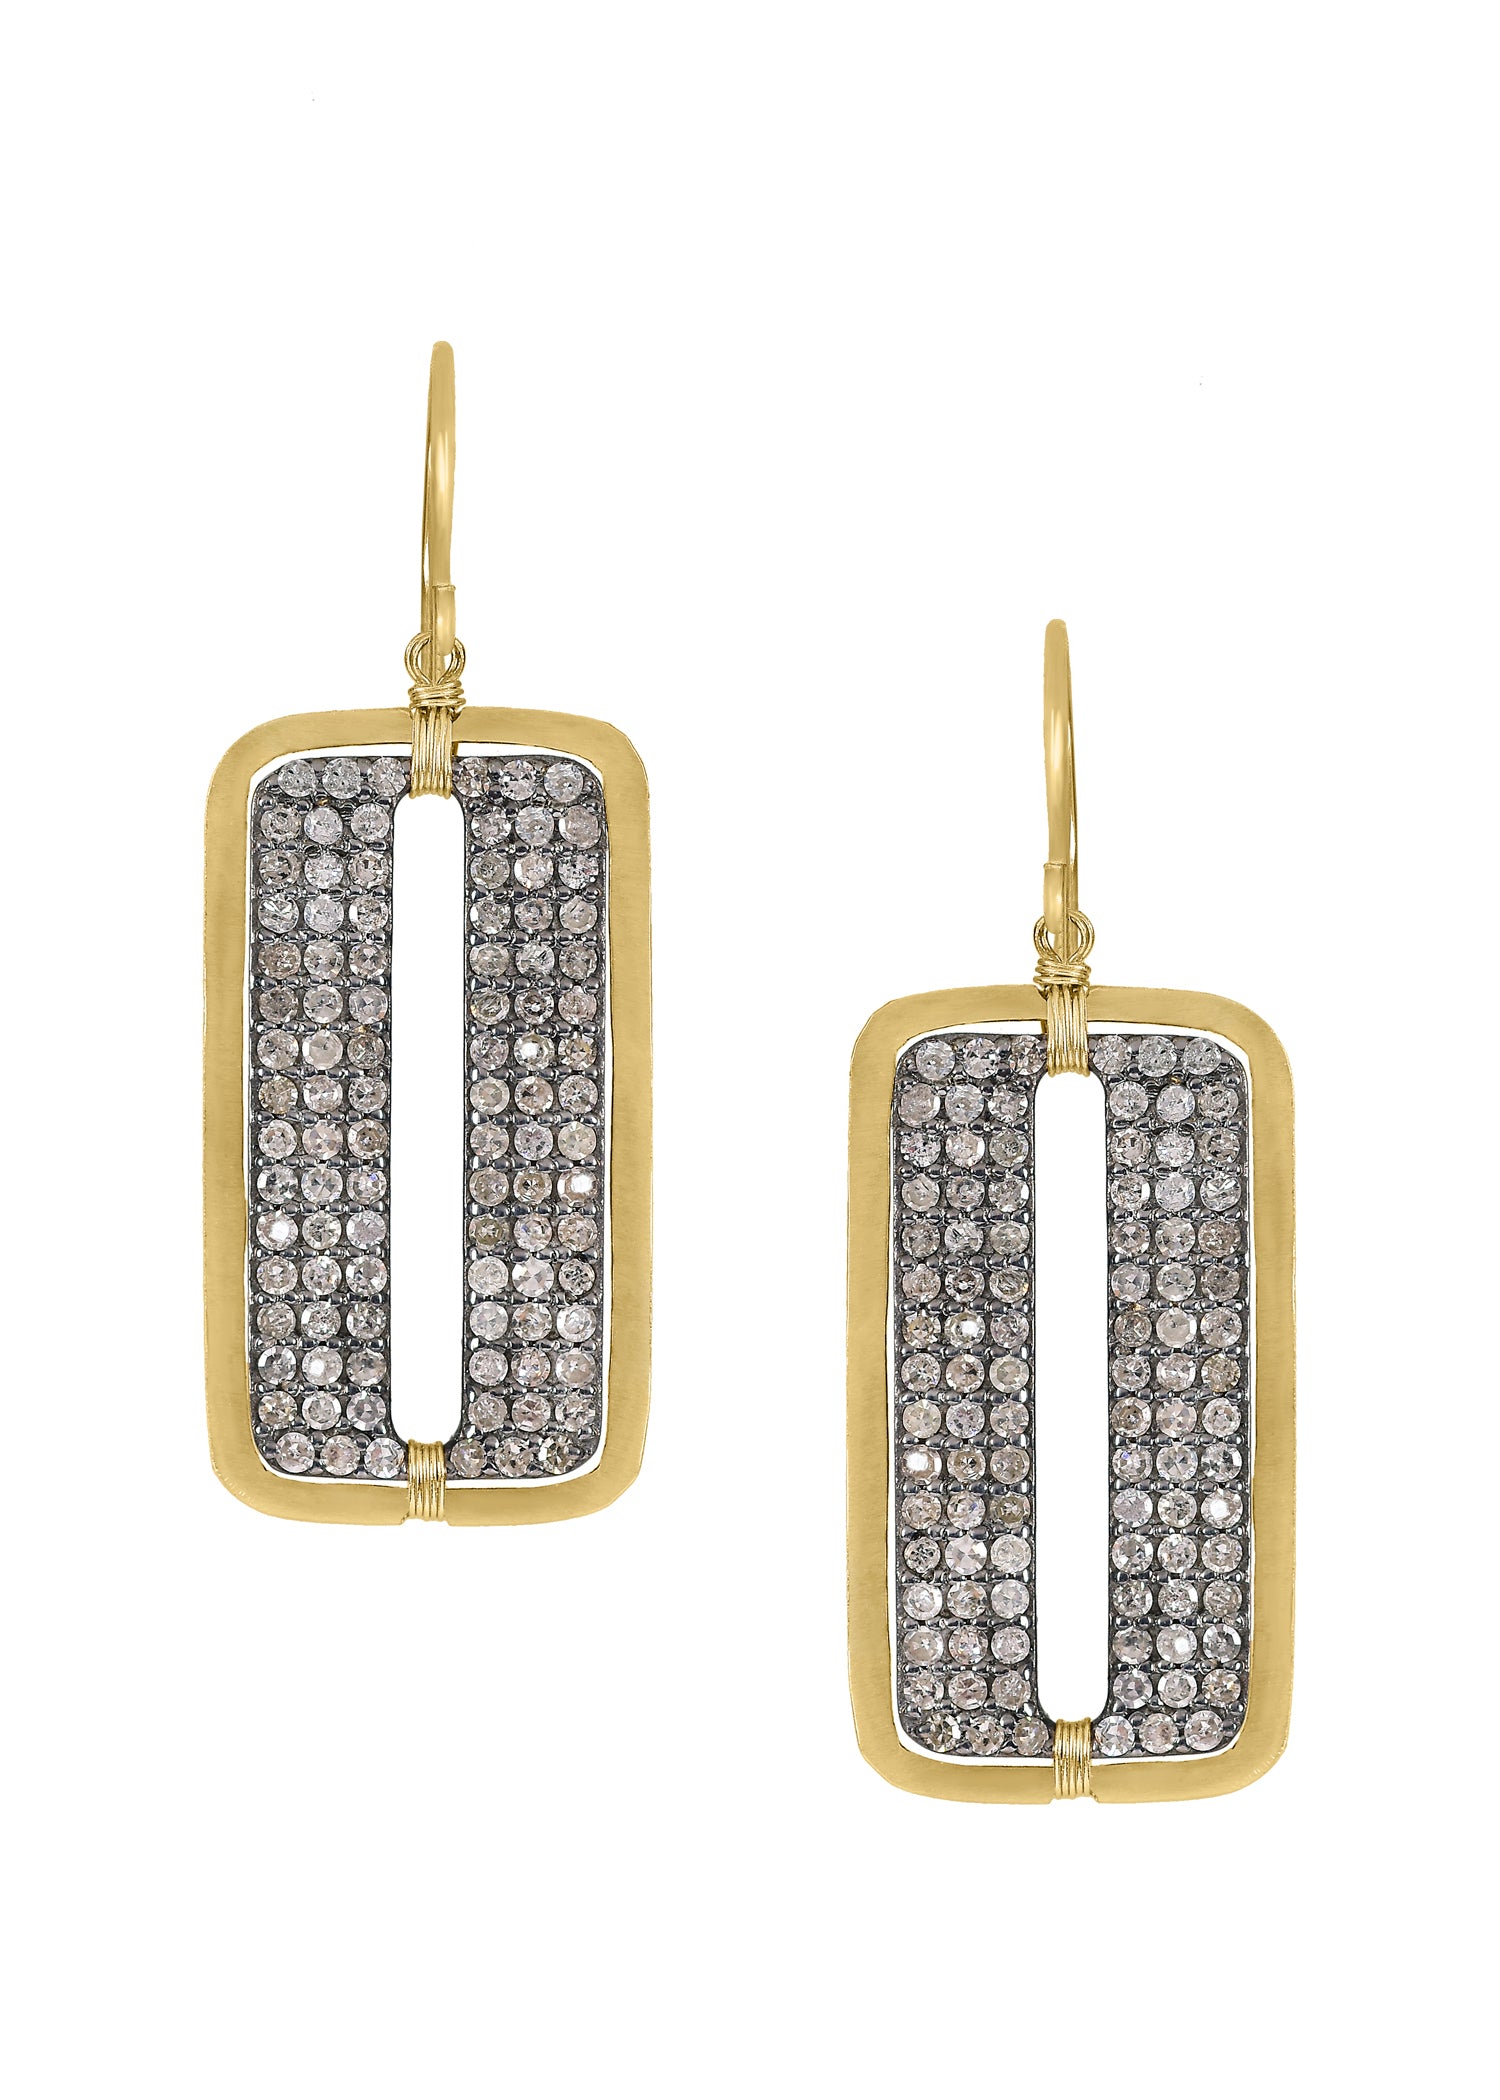 Diamond 14k gold Sterling silver Mixed metal Special order only Earrings measure 1-5/8" in length (including the ear wires) and 5/8" in width Handmade in our Los Angeles studio